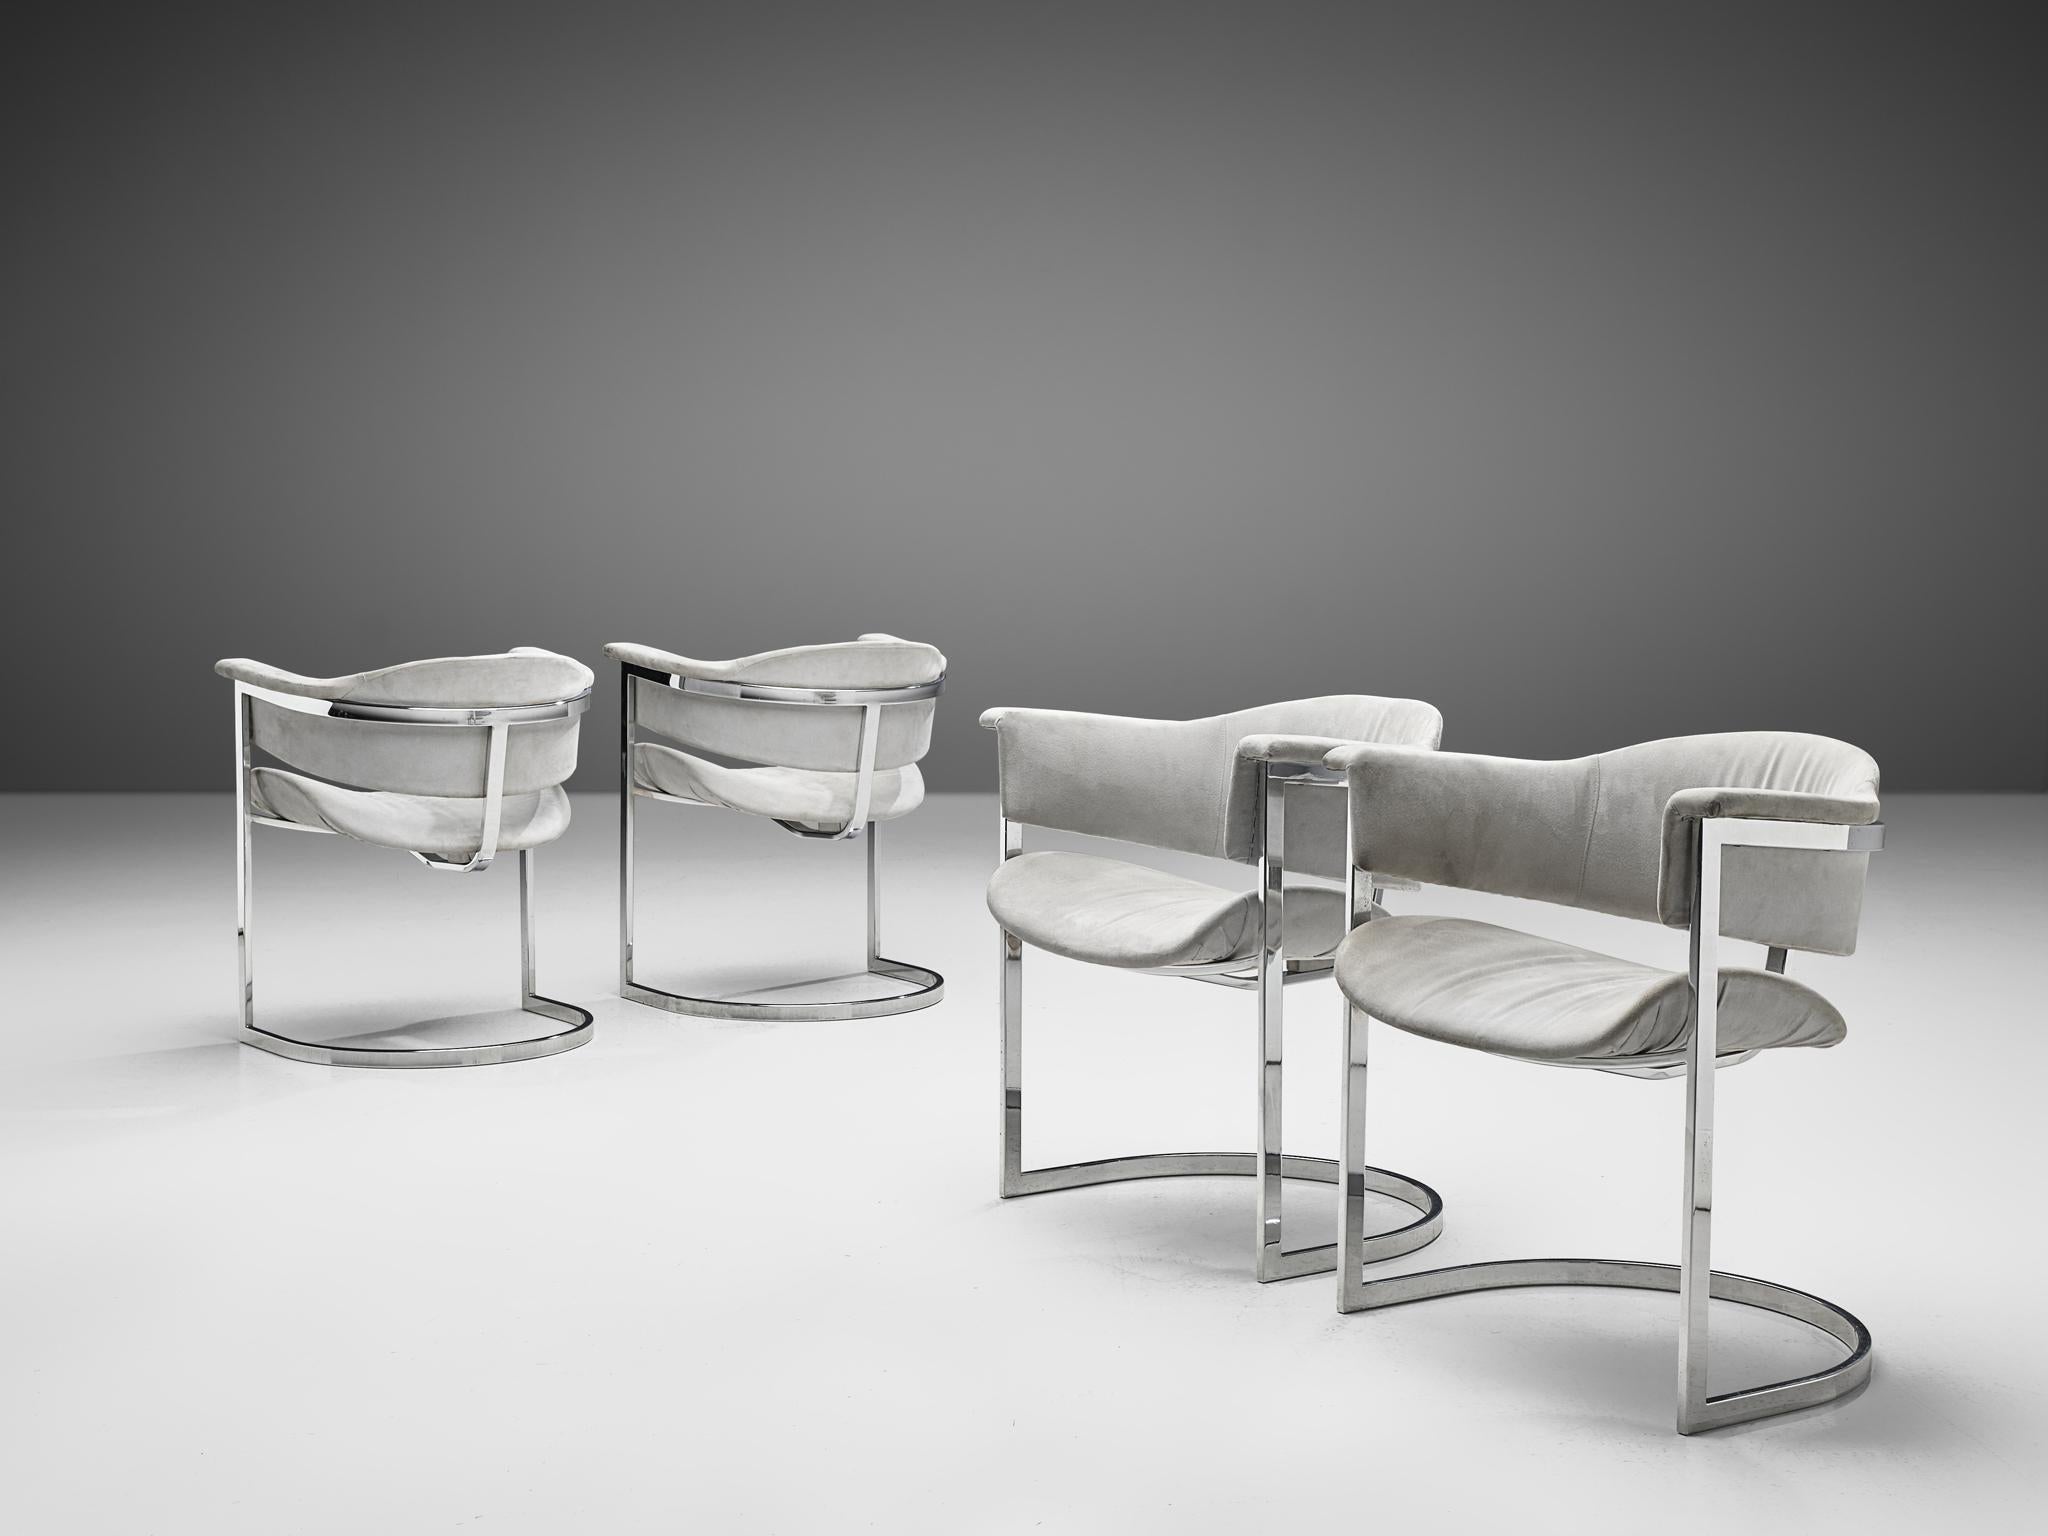 Vittorio Introini for Mario Sabot, set of four dining chairs, chrome, fabric, Italy, 1970s.

A set of four cantilevered dining chairs with a bent and chromed steel structure, designed by Vittorio Introini in the 1970s. The structure shows sharp